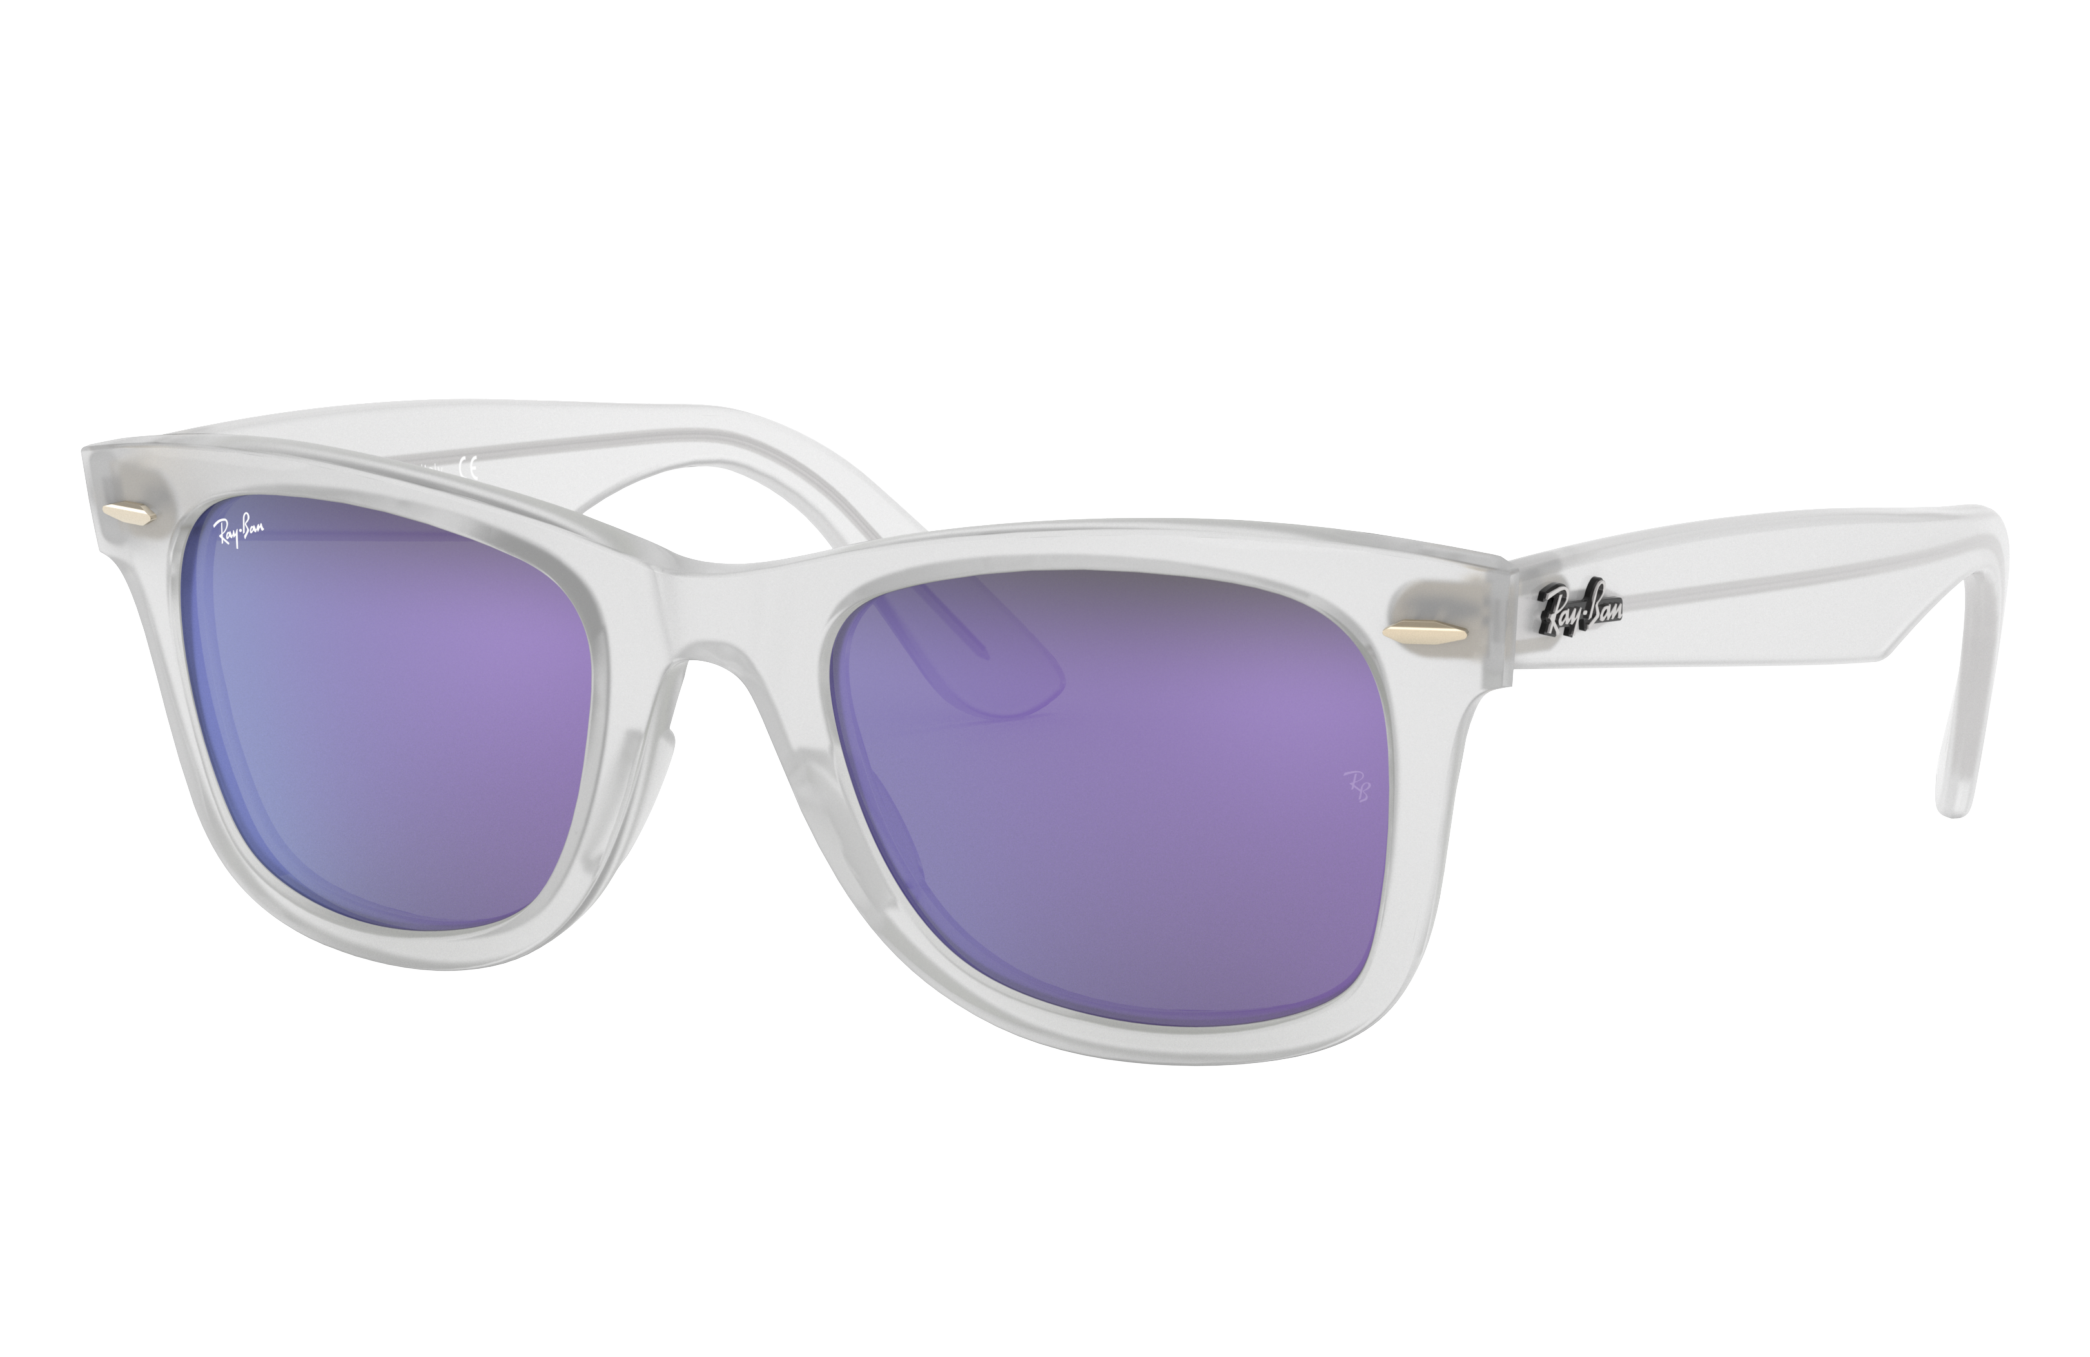 Wayfarer Ease Sunglasses in Transparent and Violet | Ray-Ban®